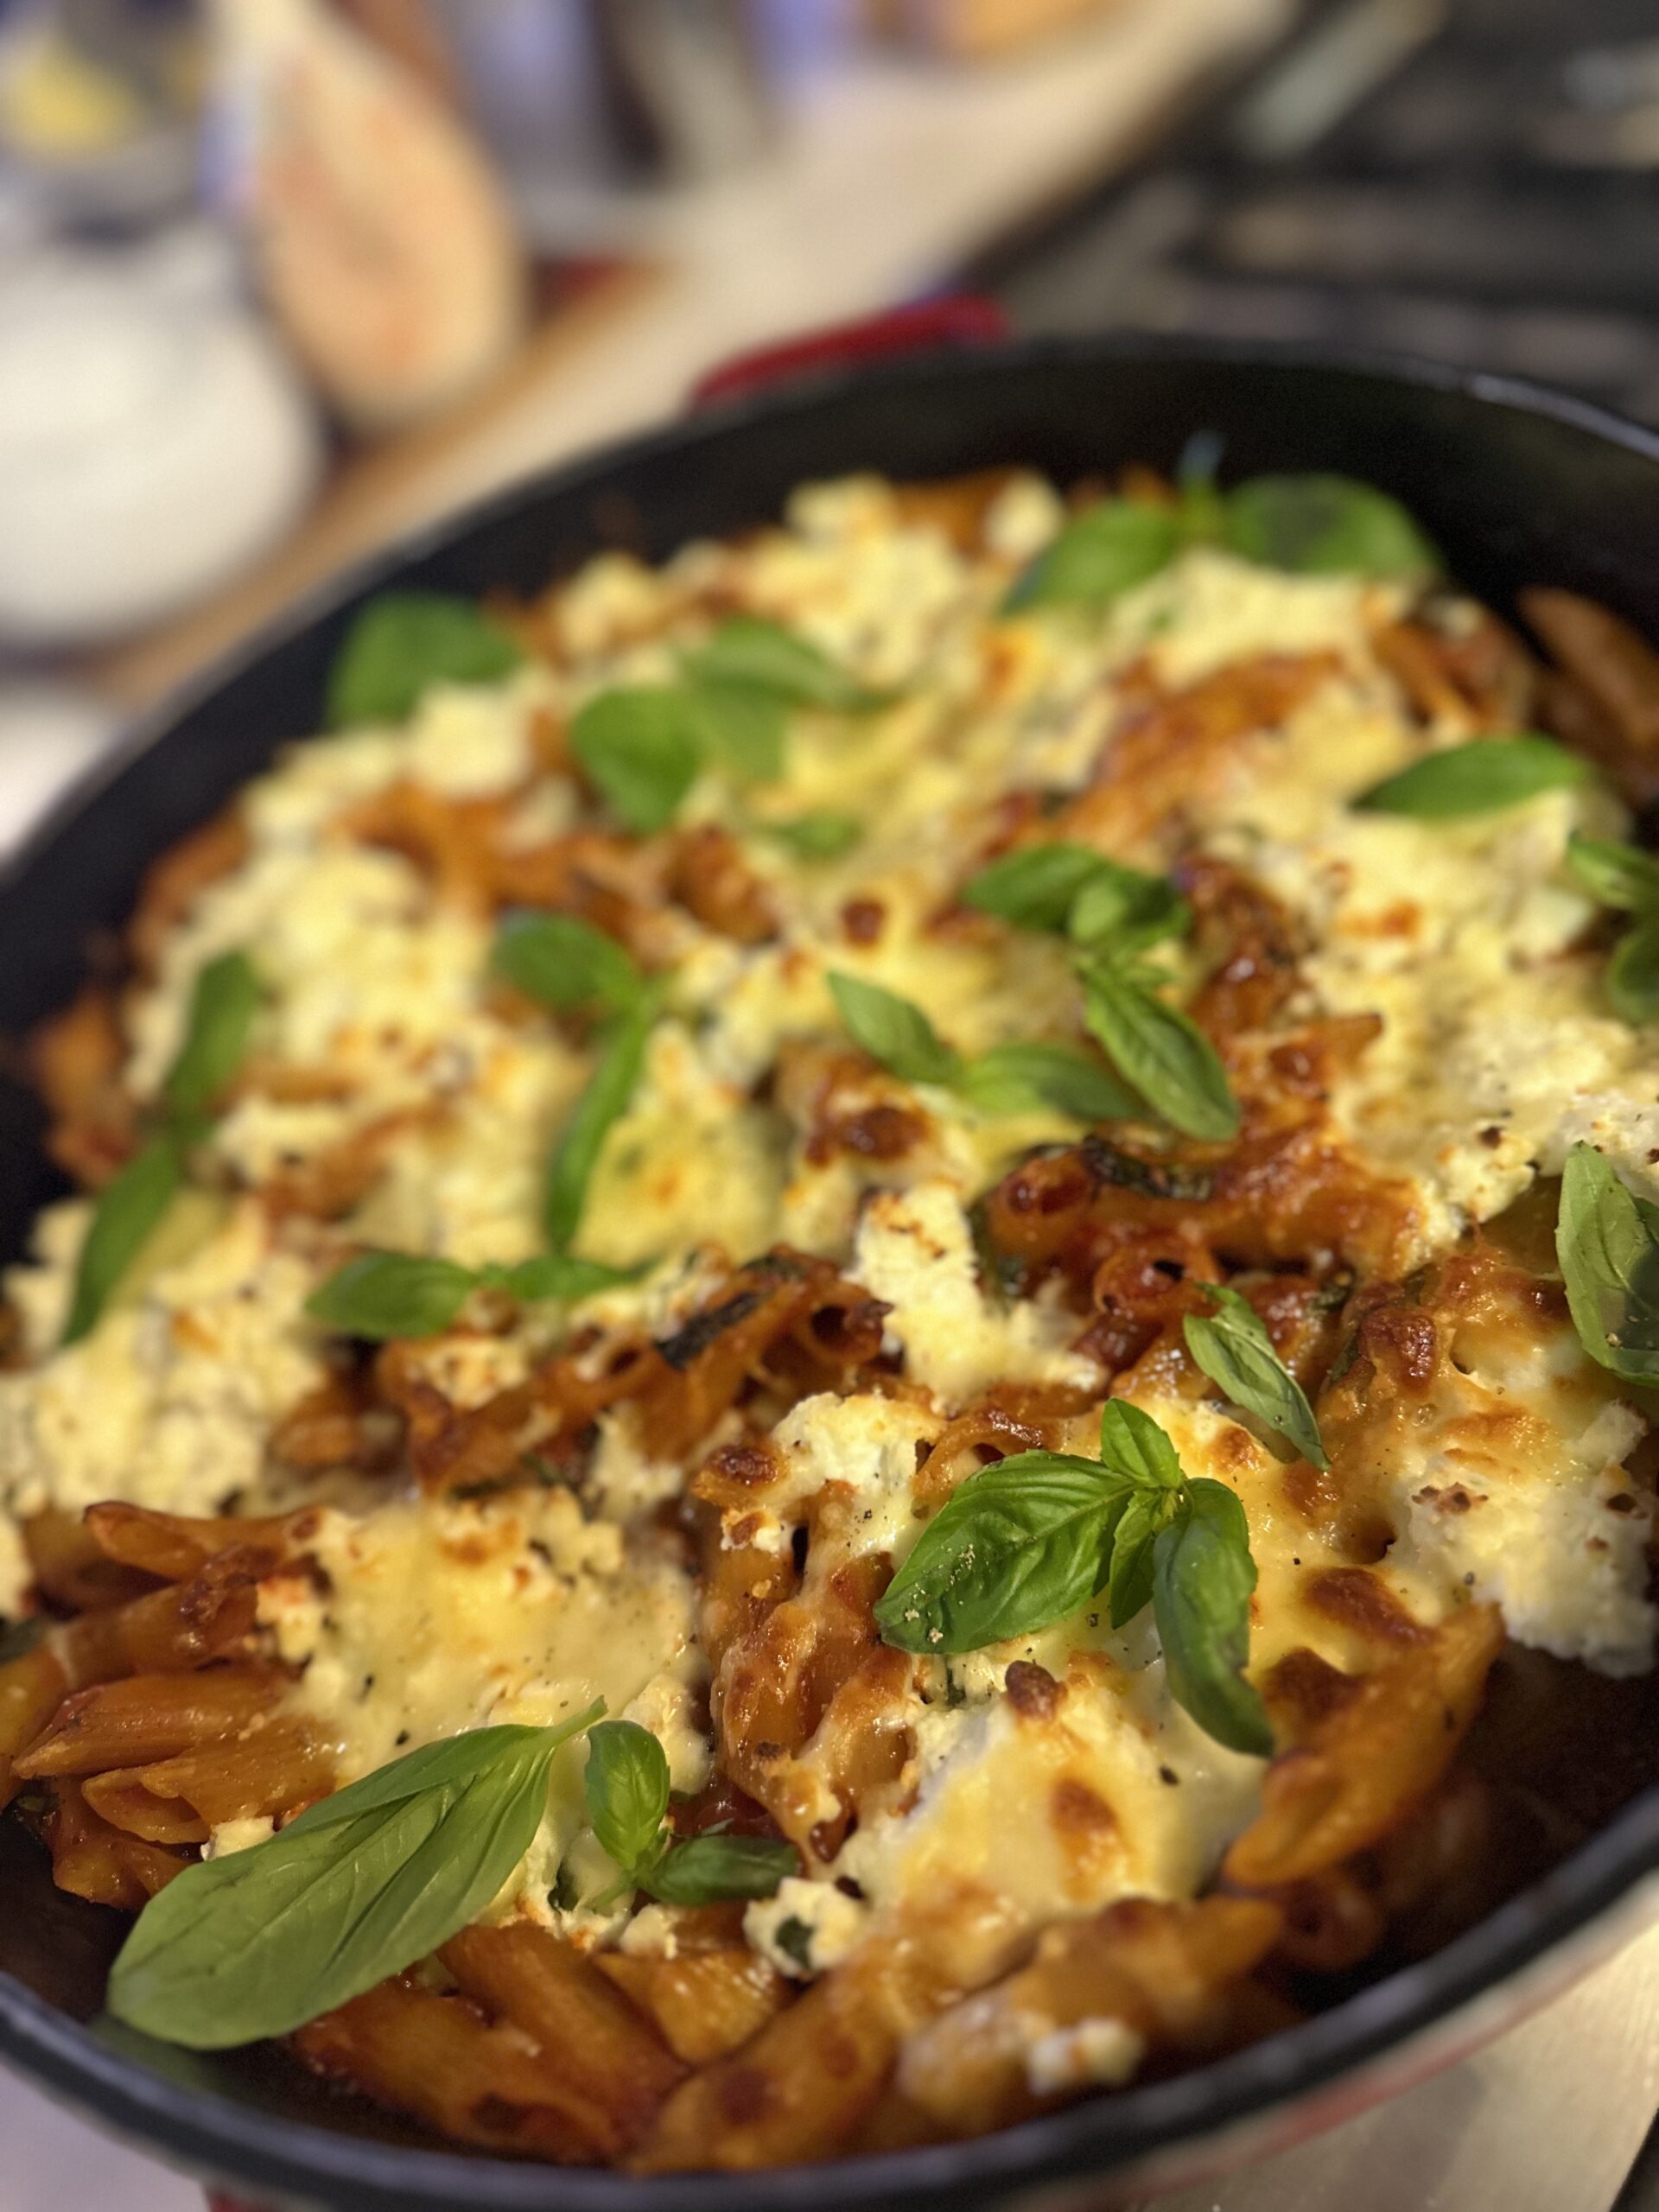 Baked Penne